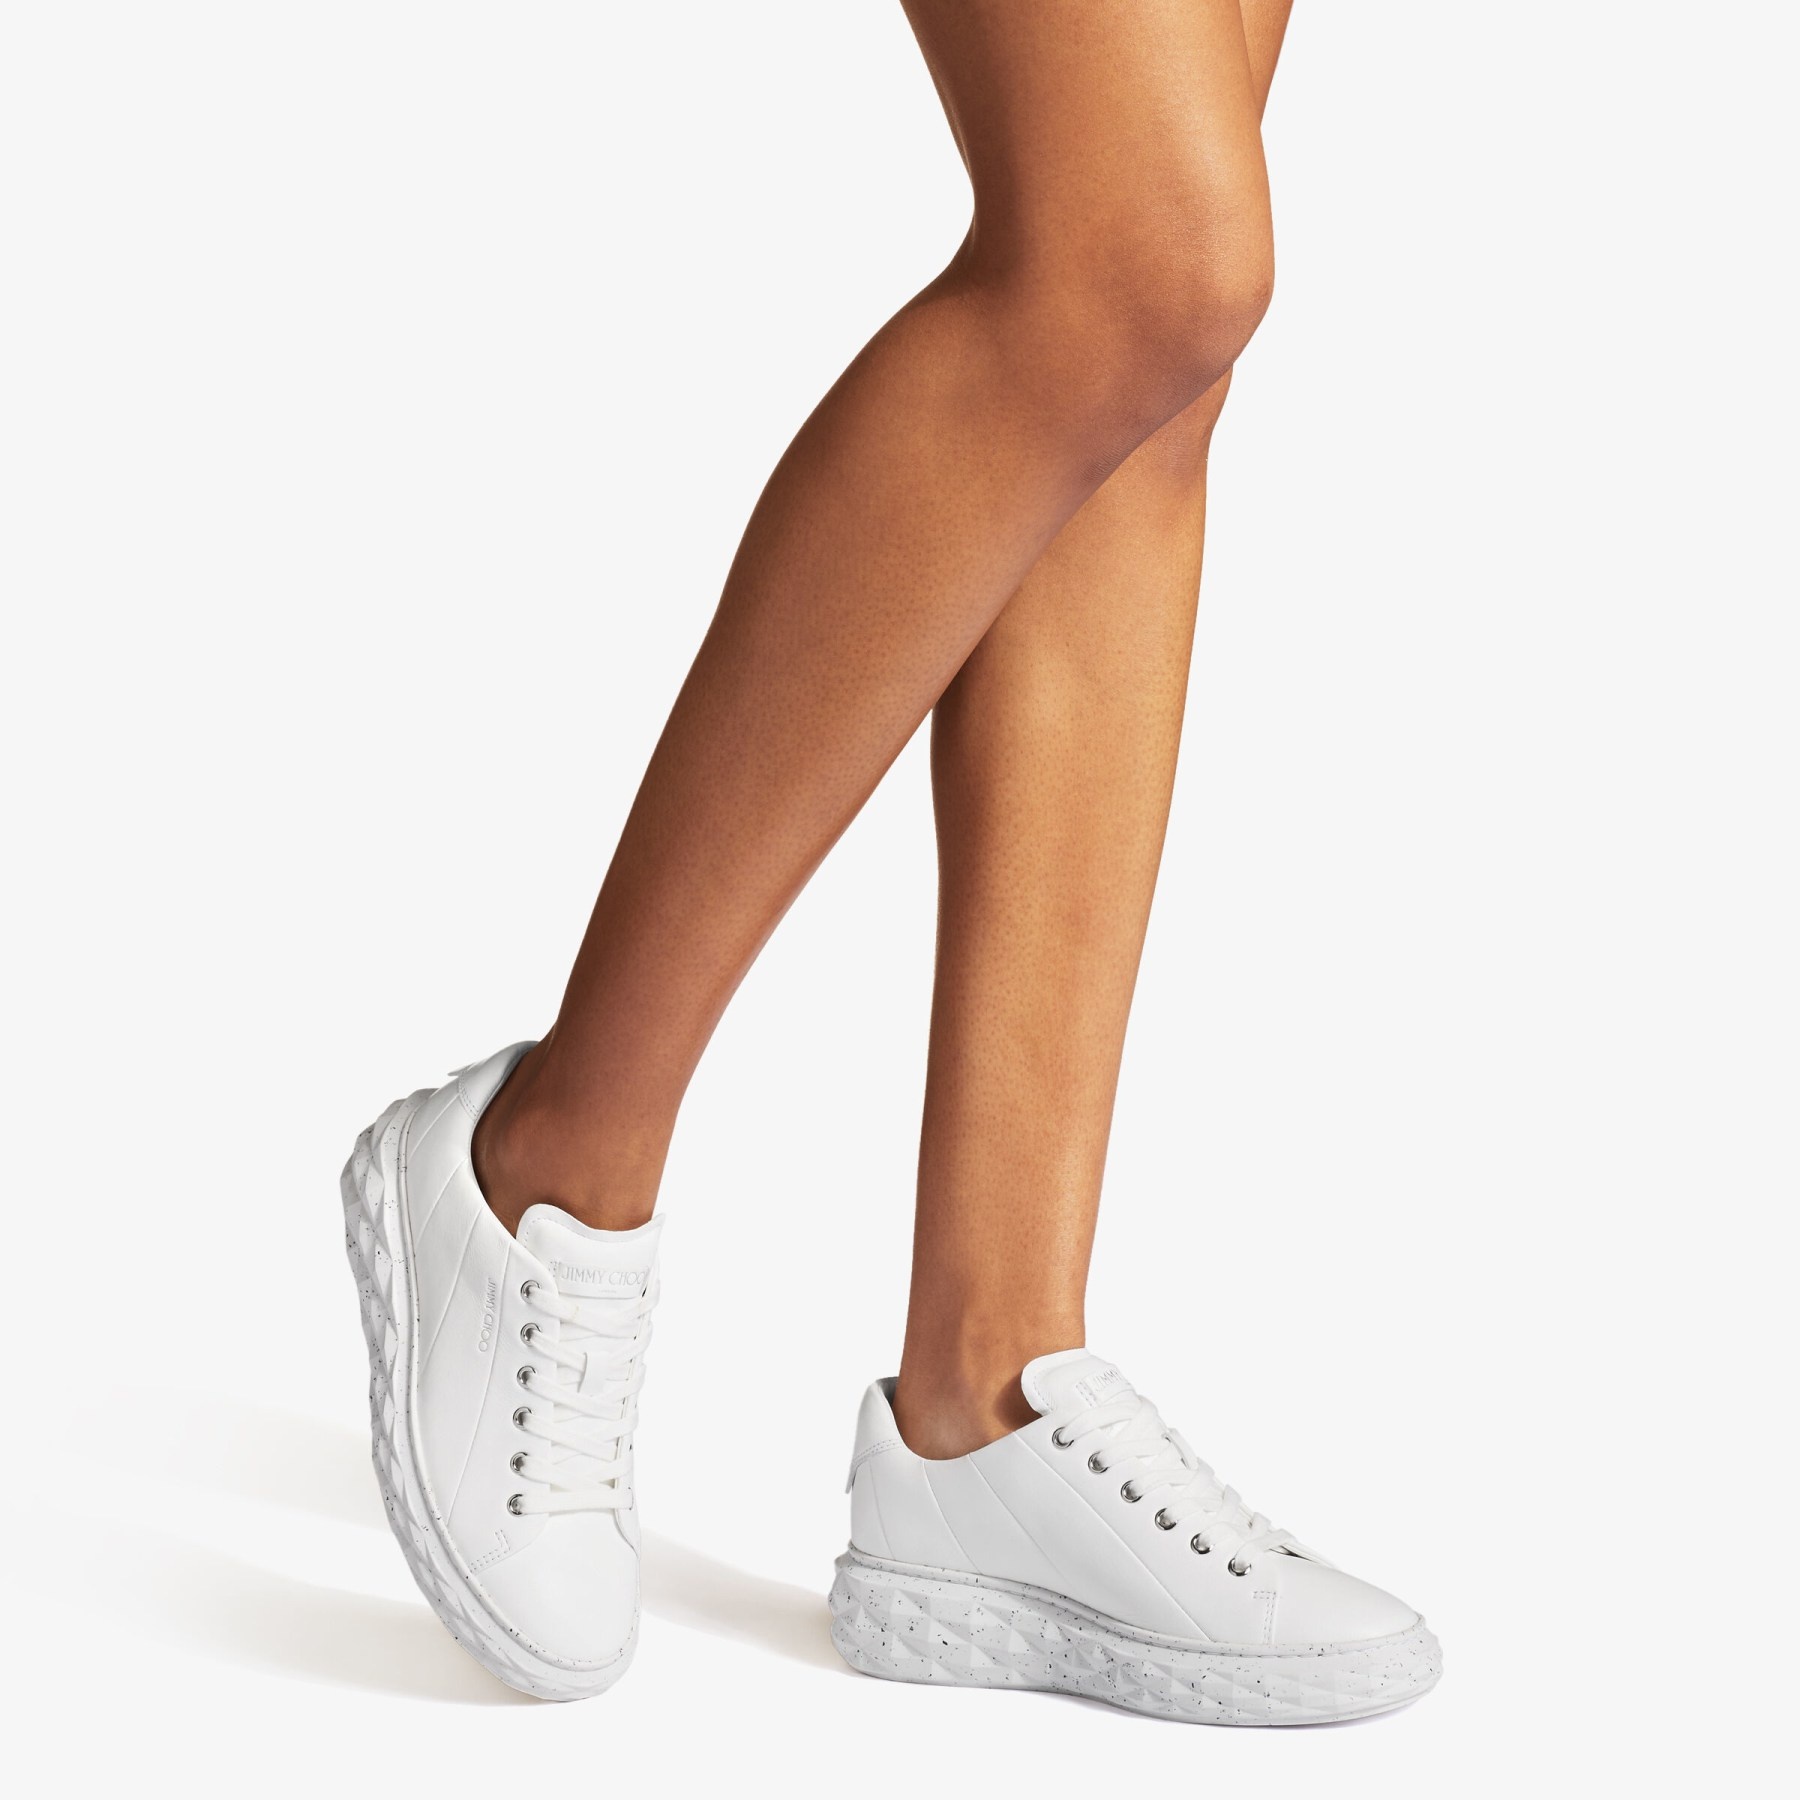 Diamond Light Maxi/F
White Nappa Leather Low-Top Trainers with Platform Sole - 2